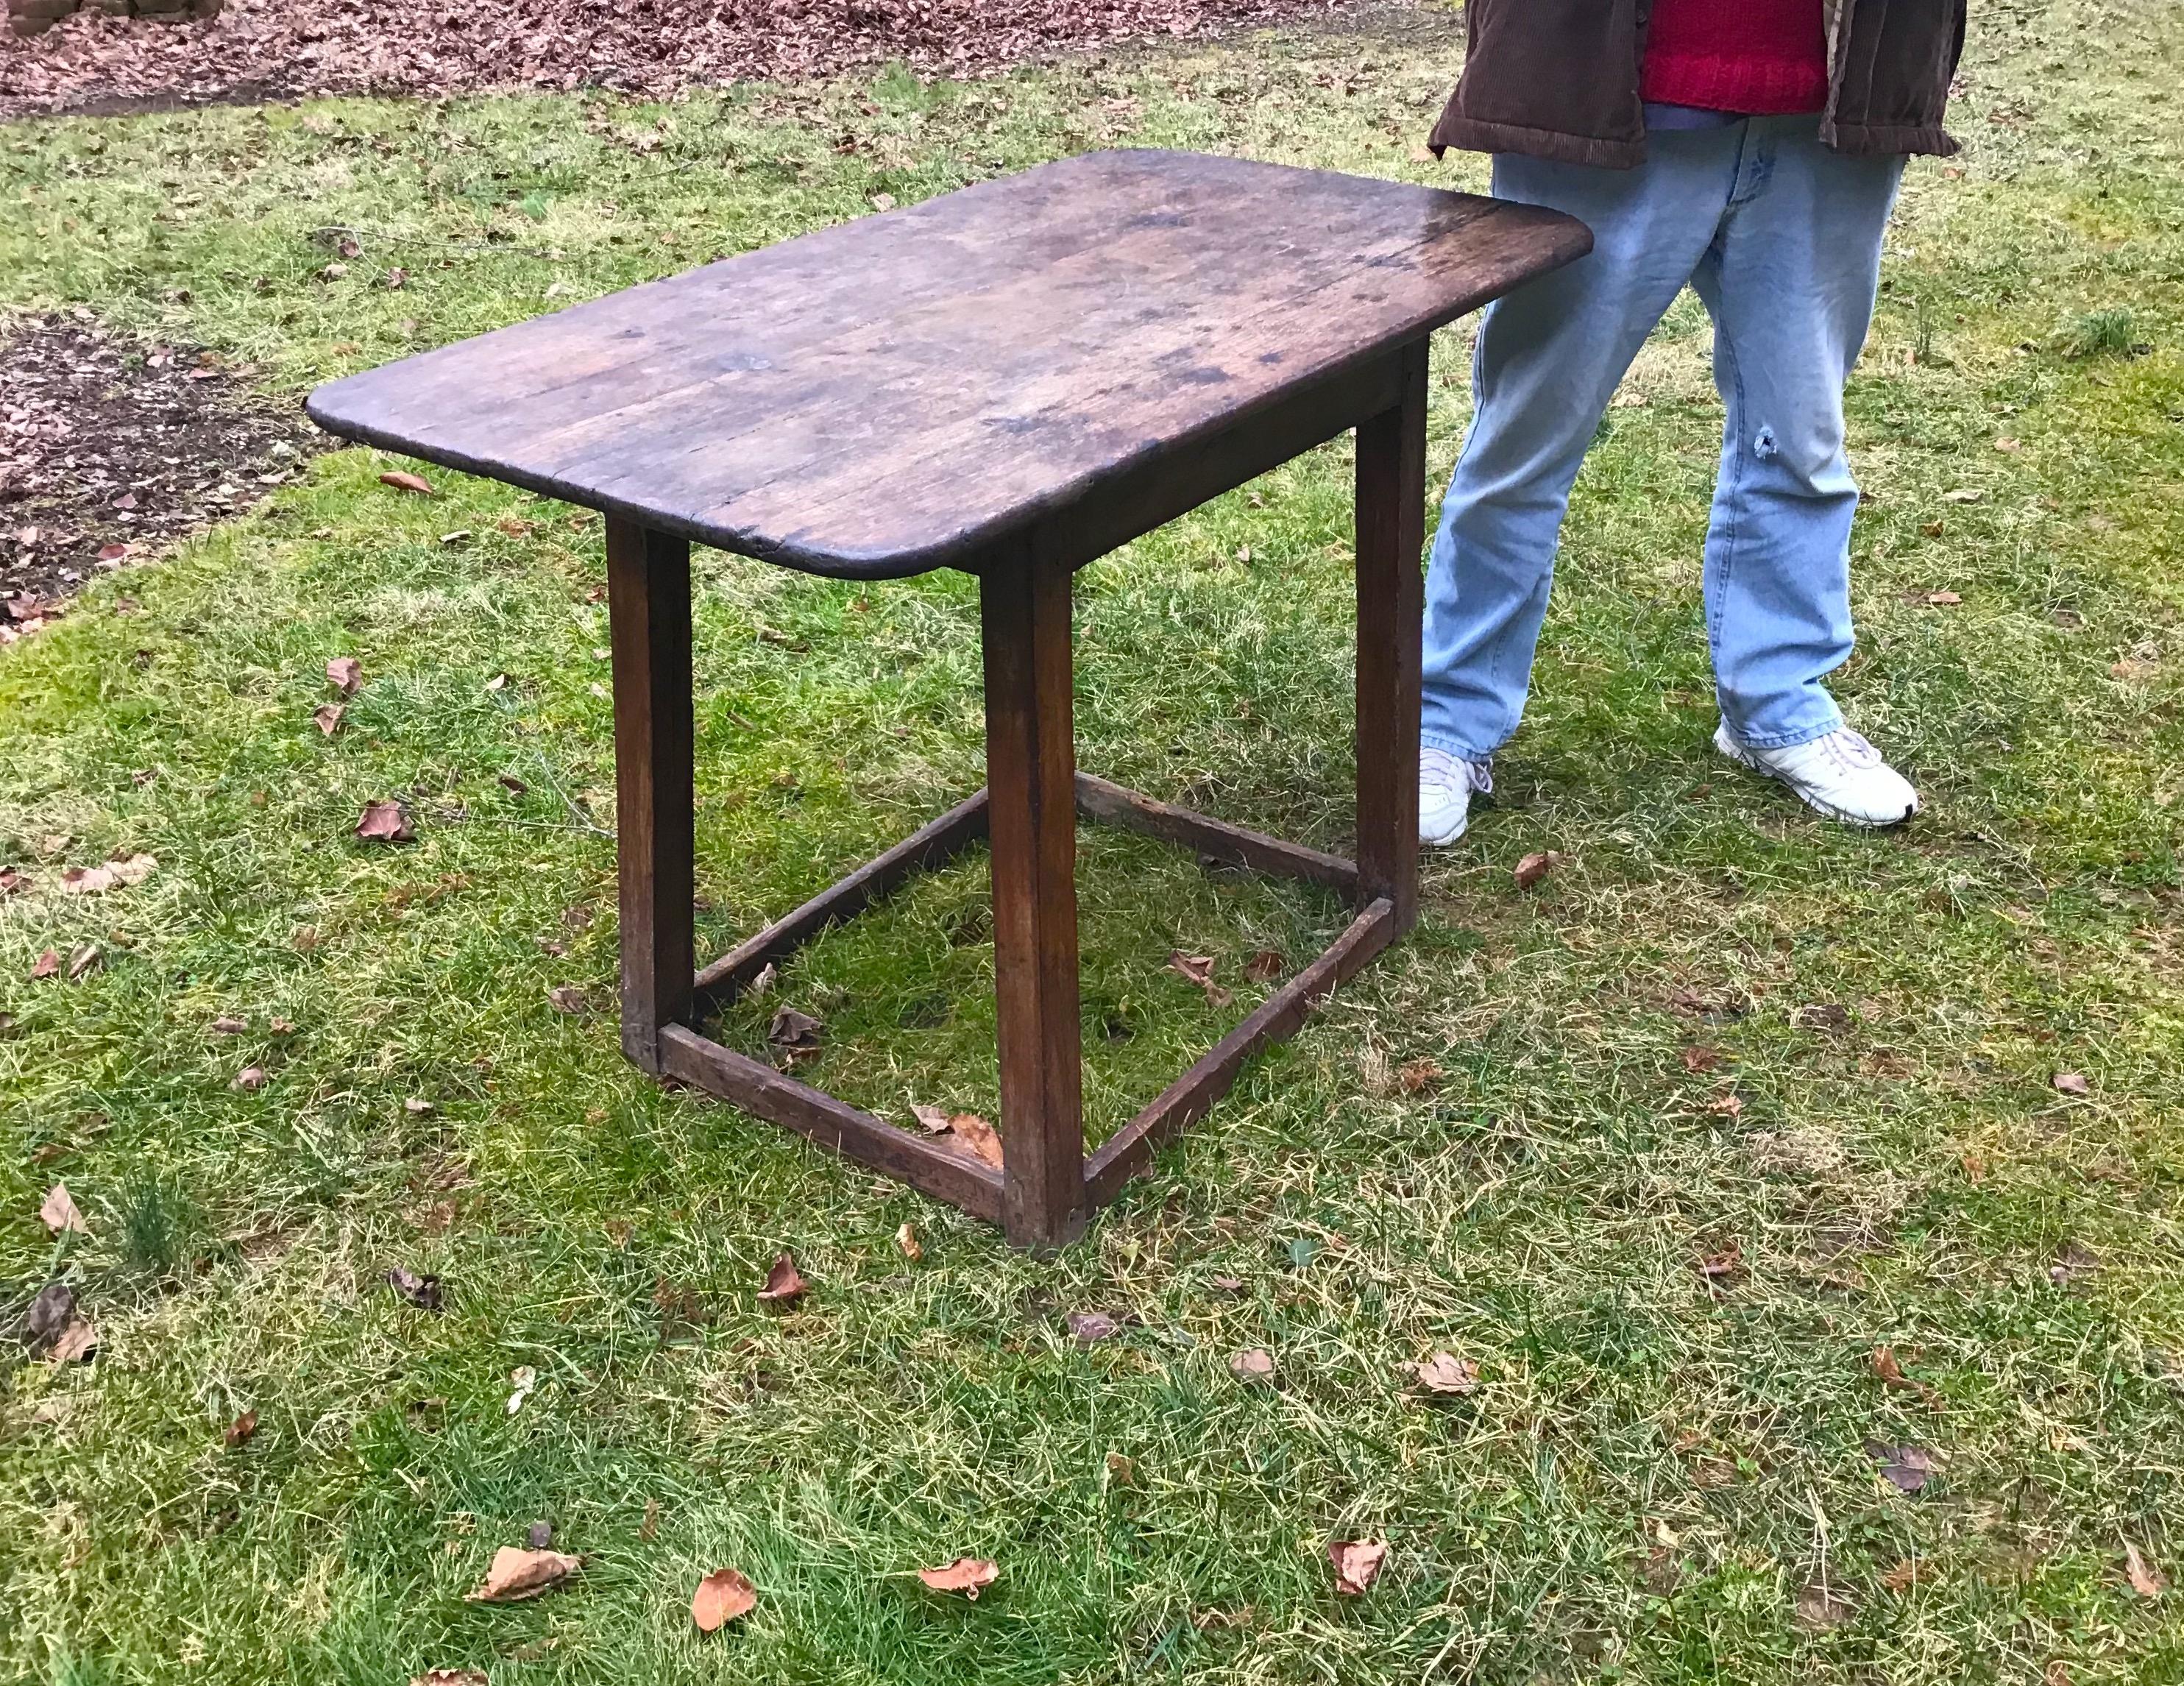 An 18th century early American tavern table, an antique primitive and rustic handmade table from eastern Long Island, New York.

 